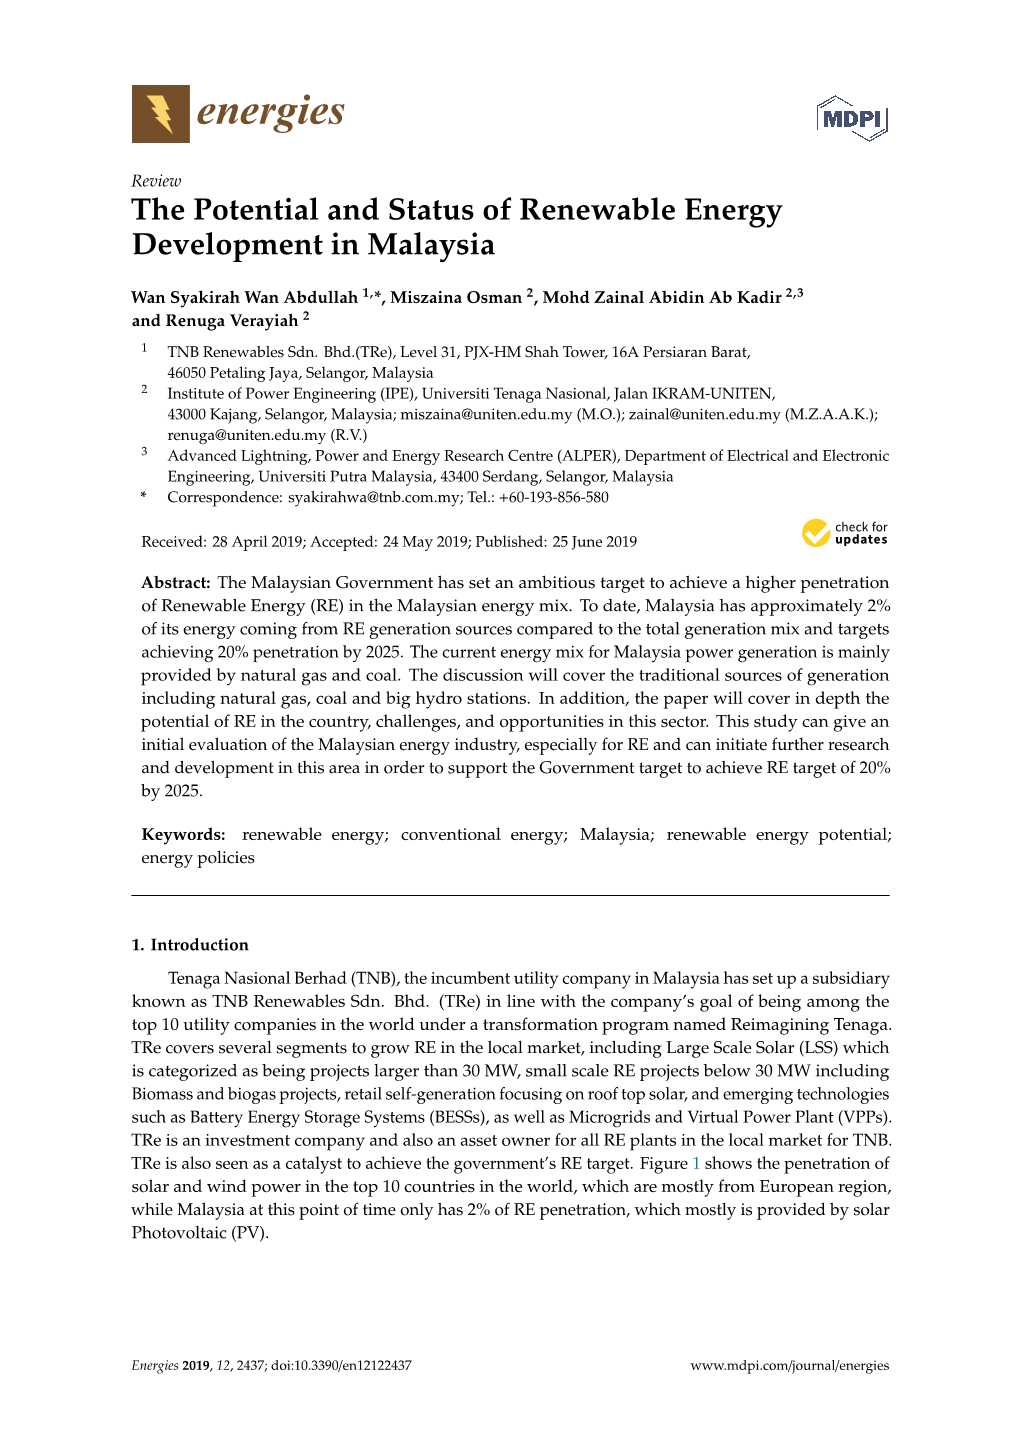 The Potential and Status of Renewable Energy Development in Malaysia